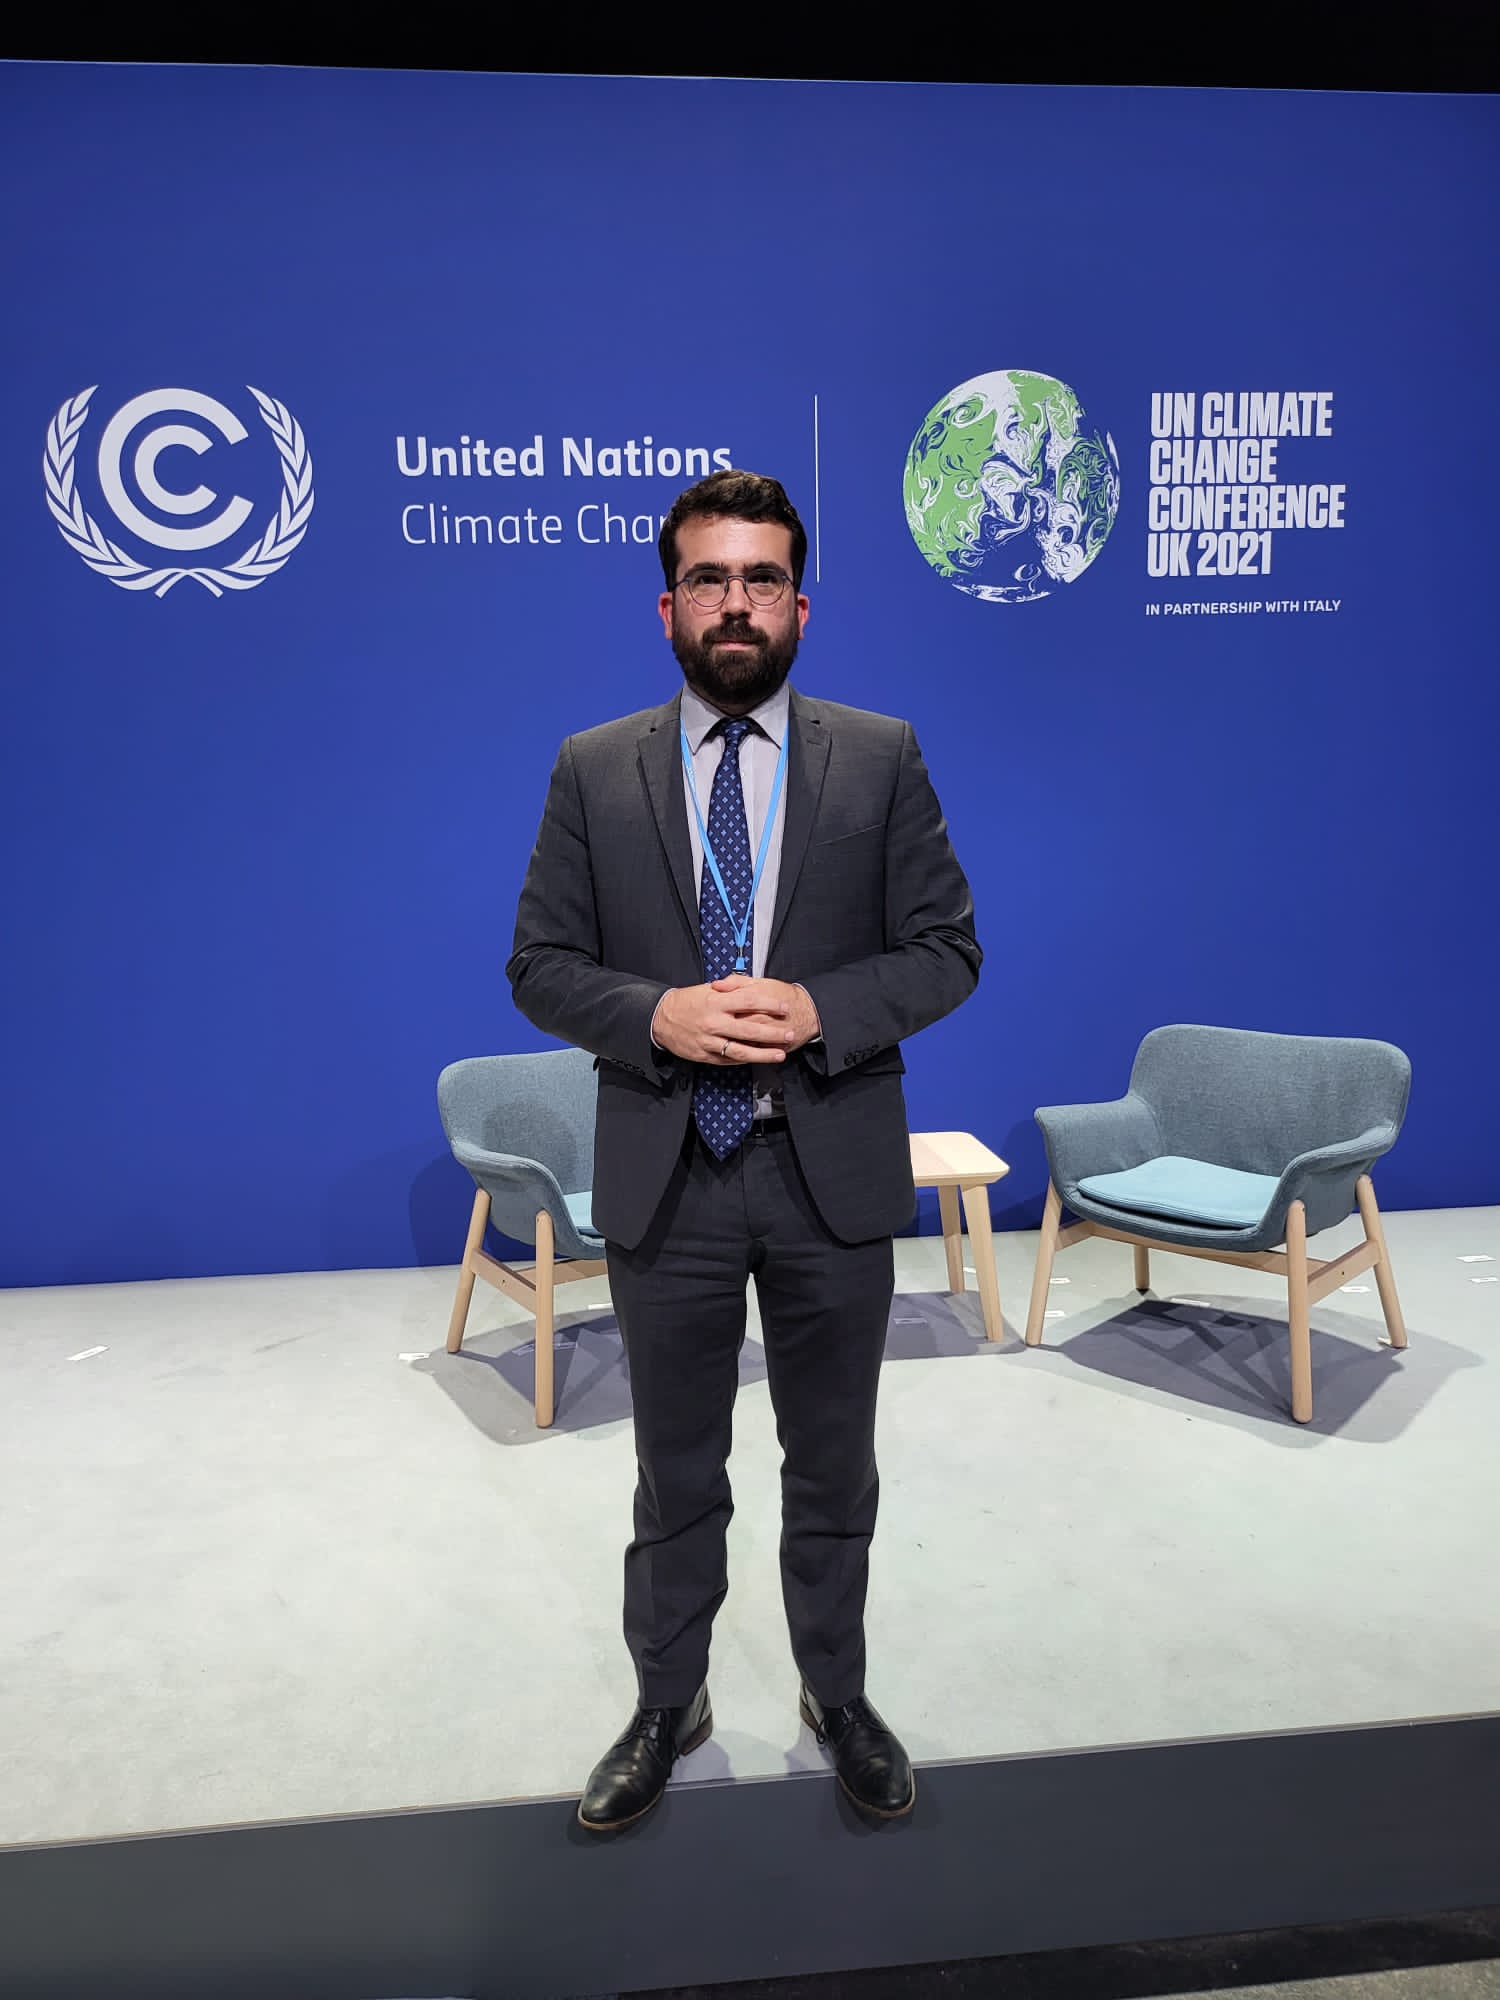 Vincent Chauvet at COP26, securing role for local and regional governments